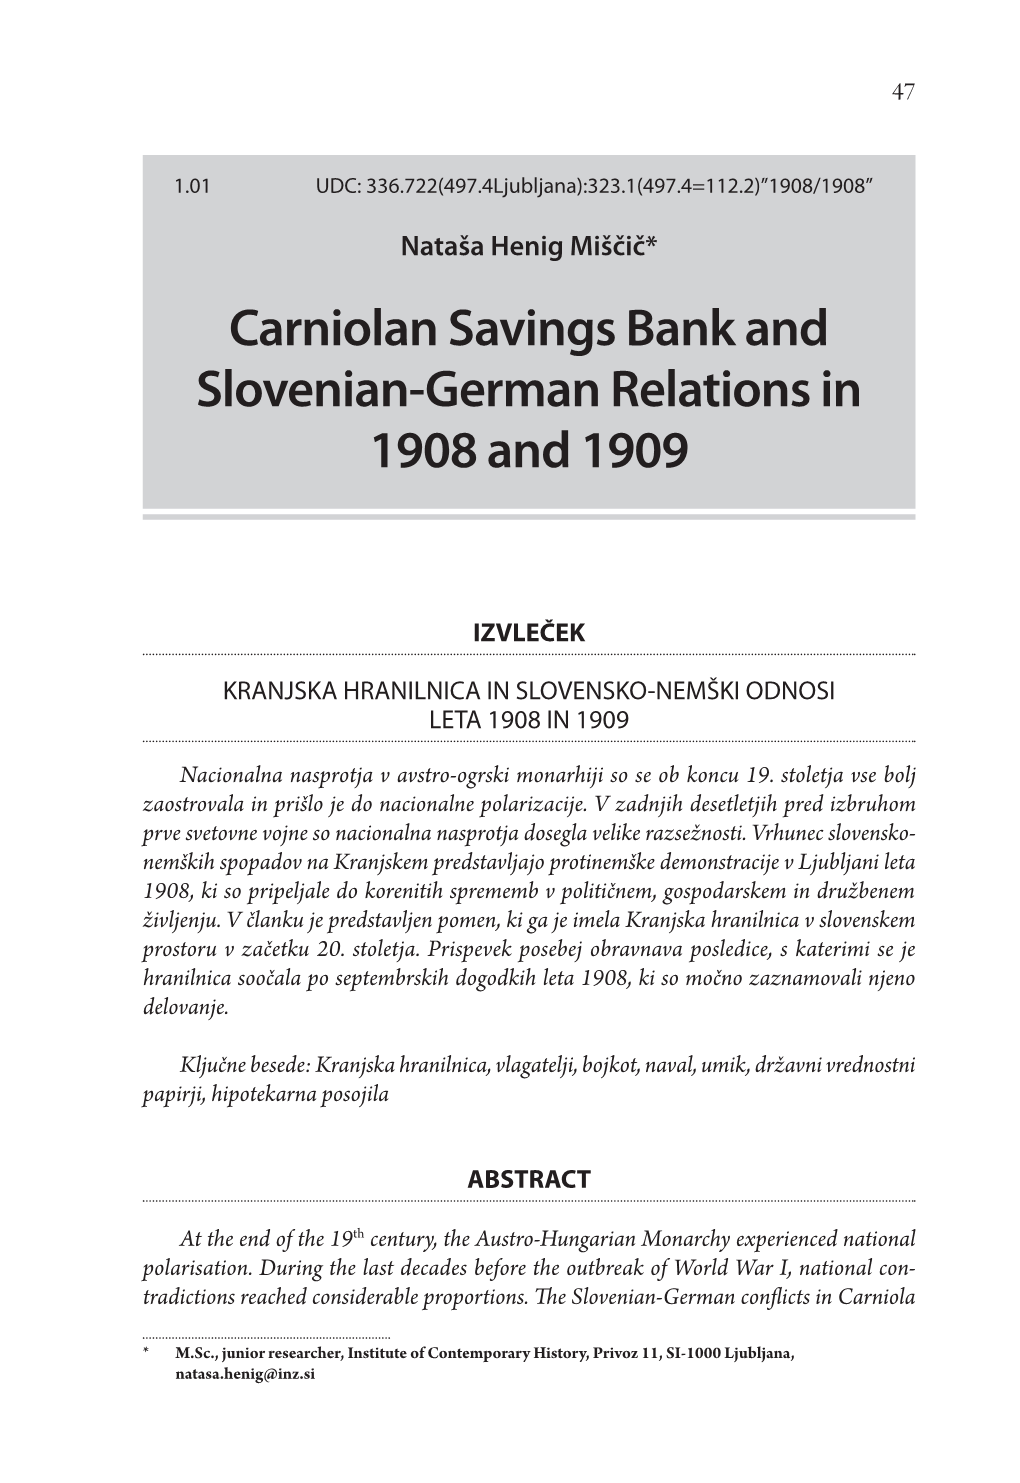 Carniolan Savings Bank and Slovenian-German Relations in 1908 and 1909 47